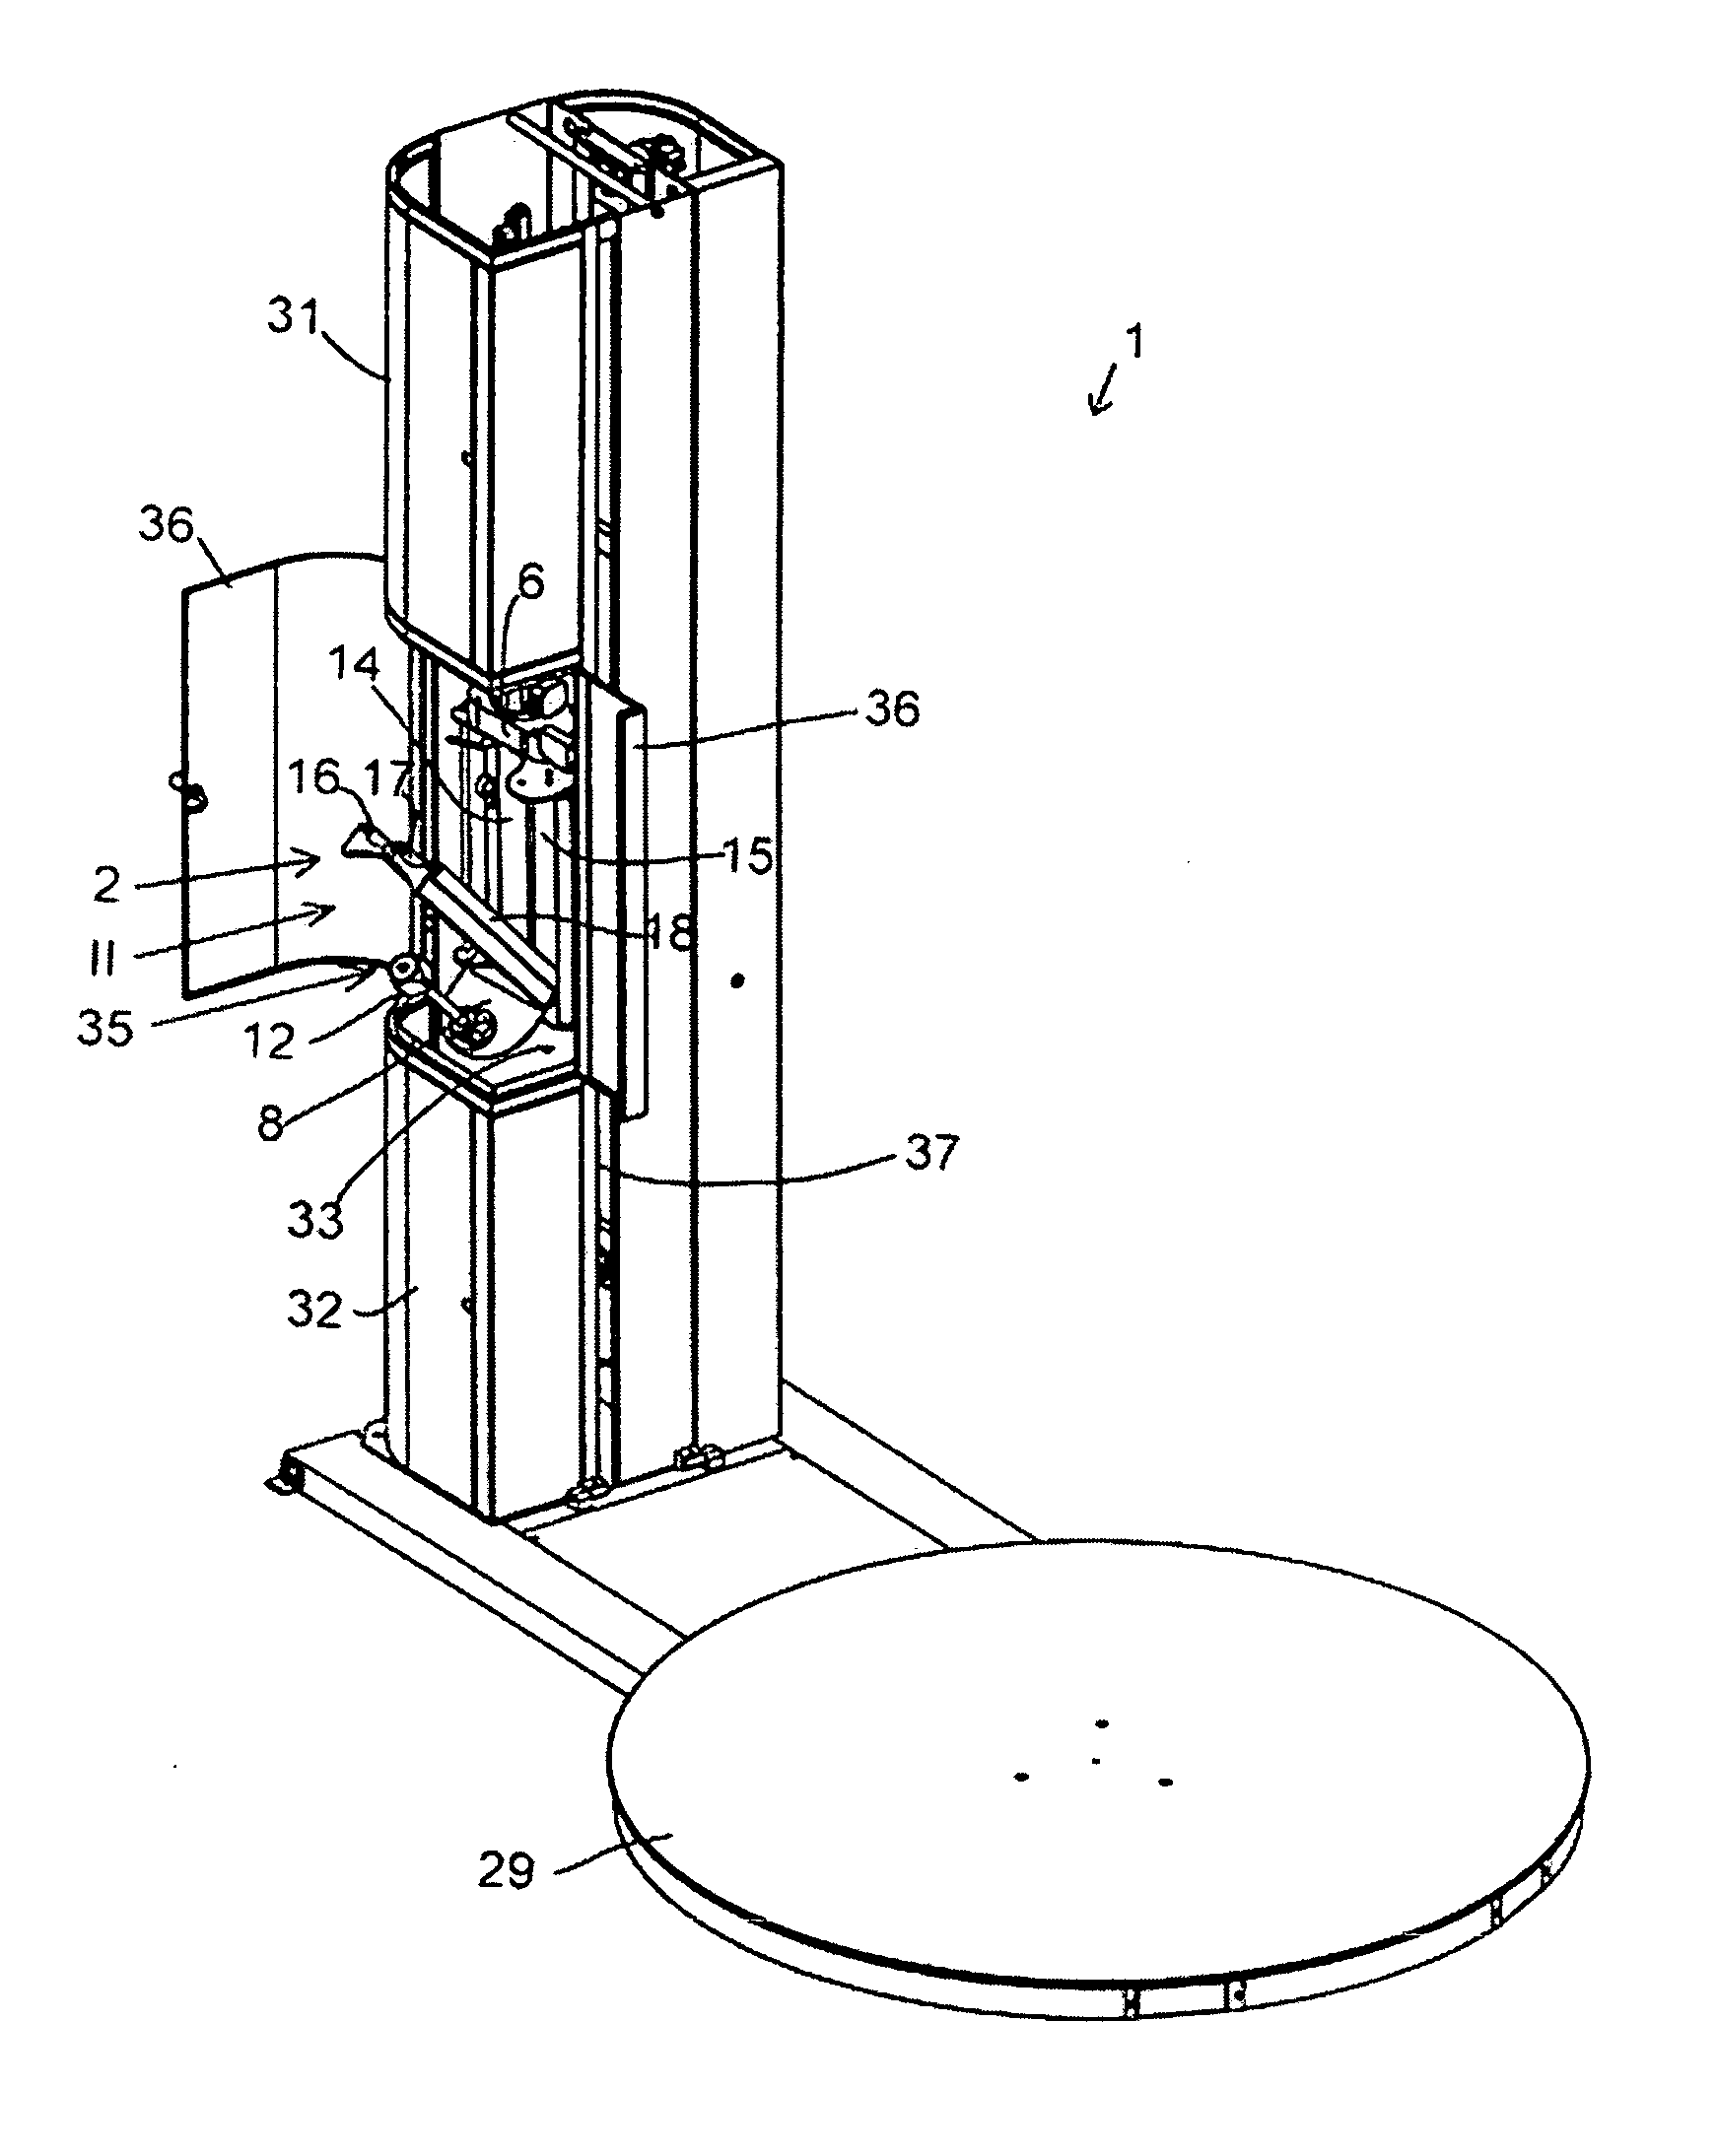 Wrapping apparatus comprising a dispenser for dispensing stretched wrap film